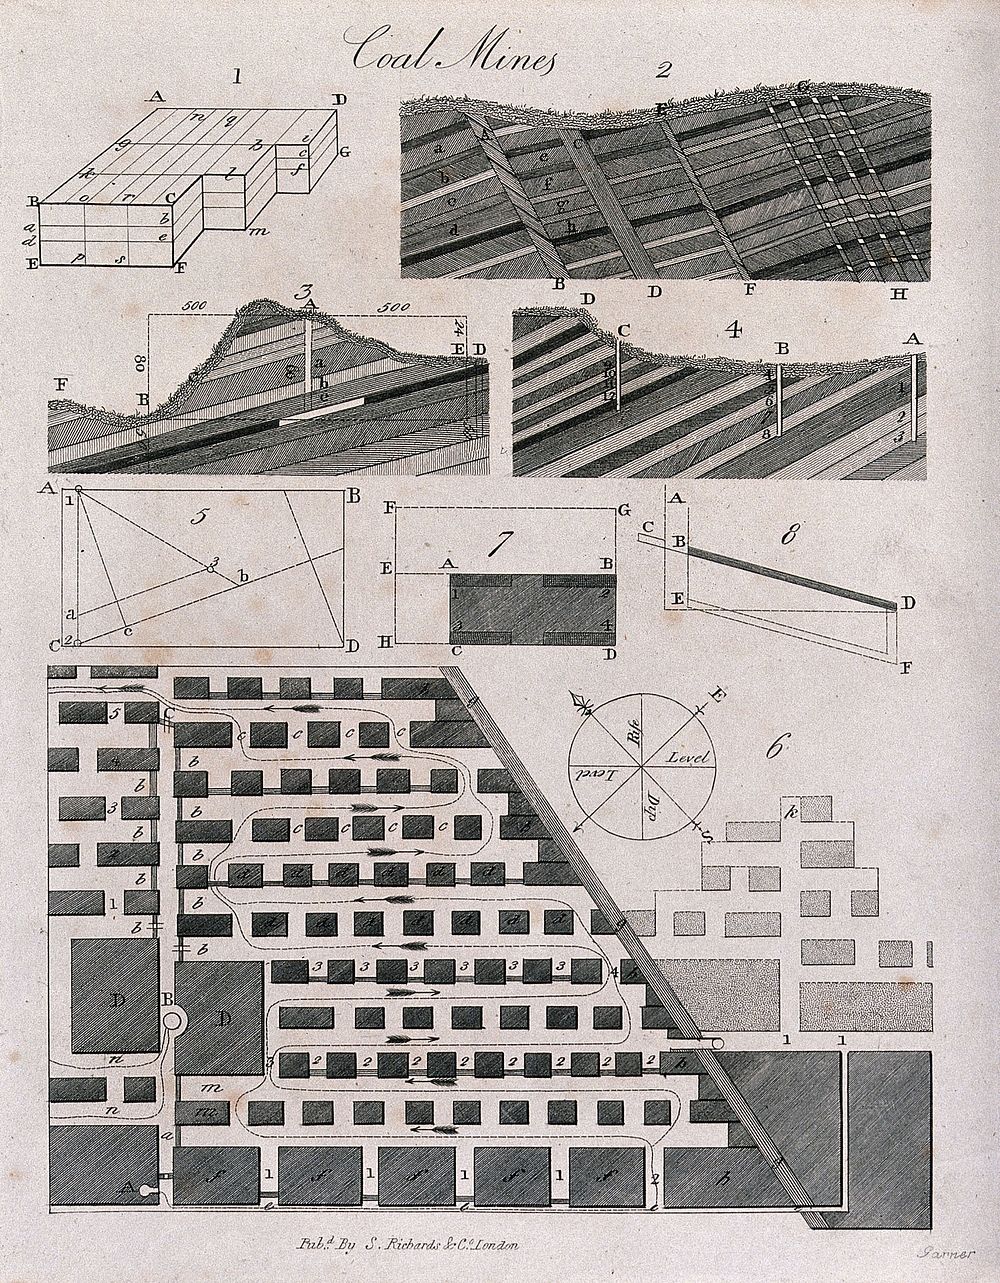 Sections of a coal mine. Etching by Garner.